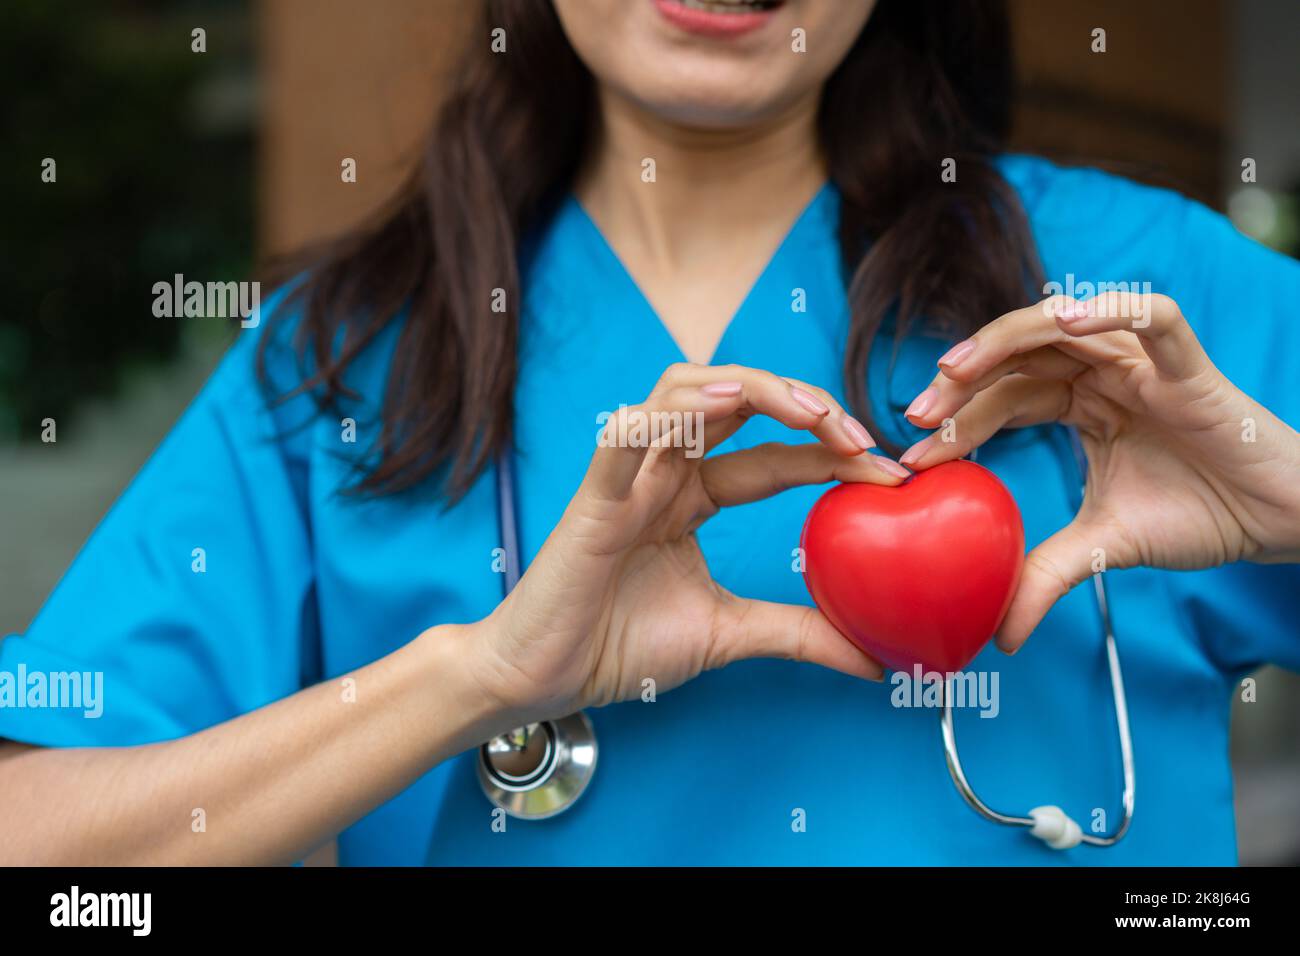 Female Cardiovascular disease doctor or cardiologist with stethoscope holding red heart, Medical health care and doctor staff service concept. Stock Photo